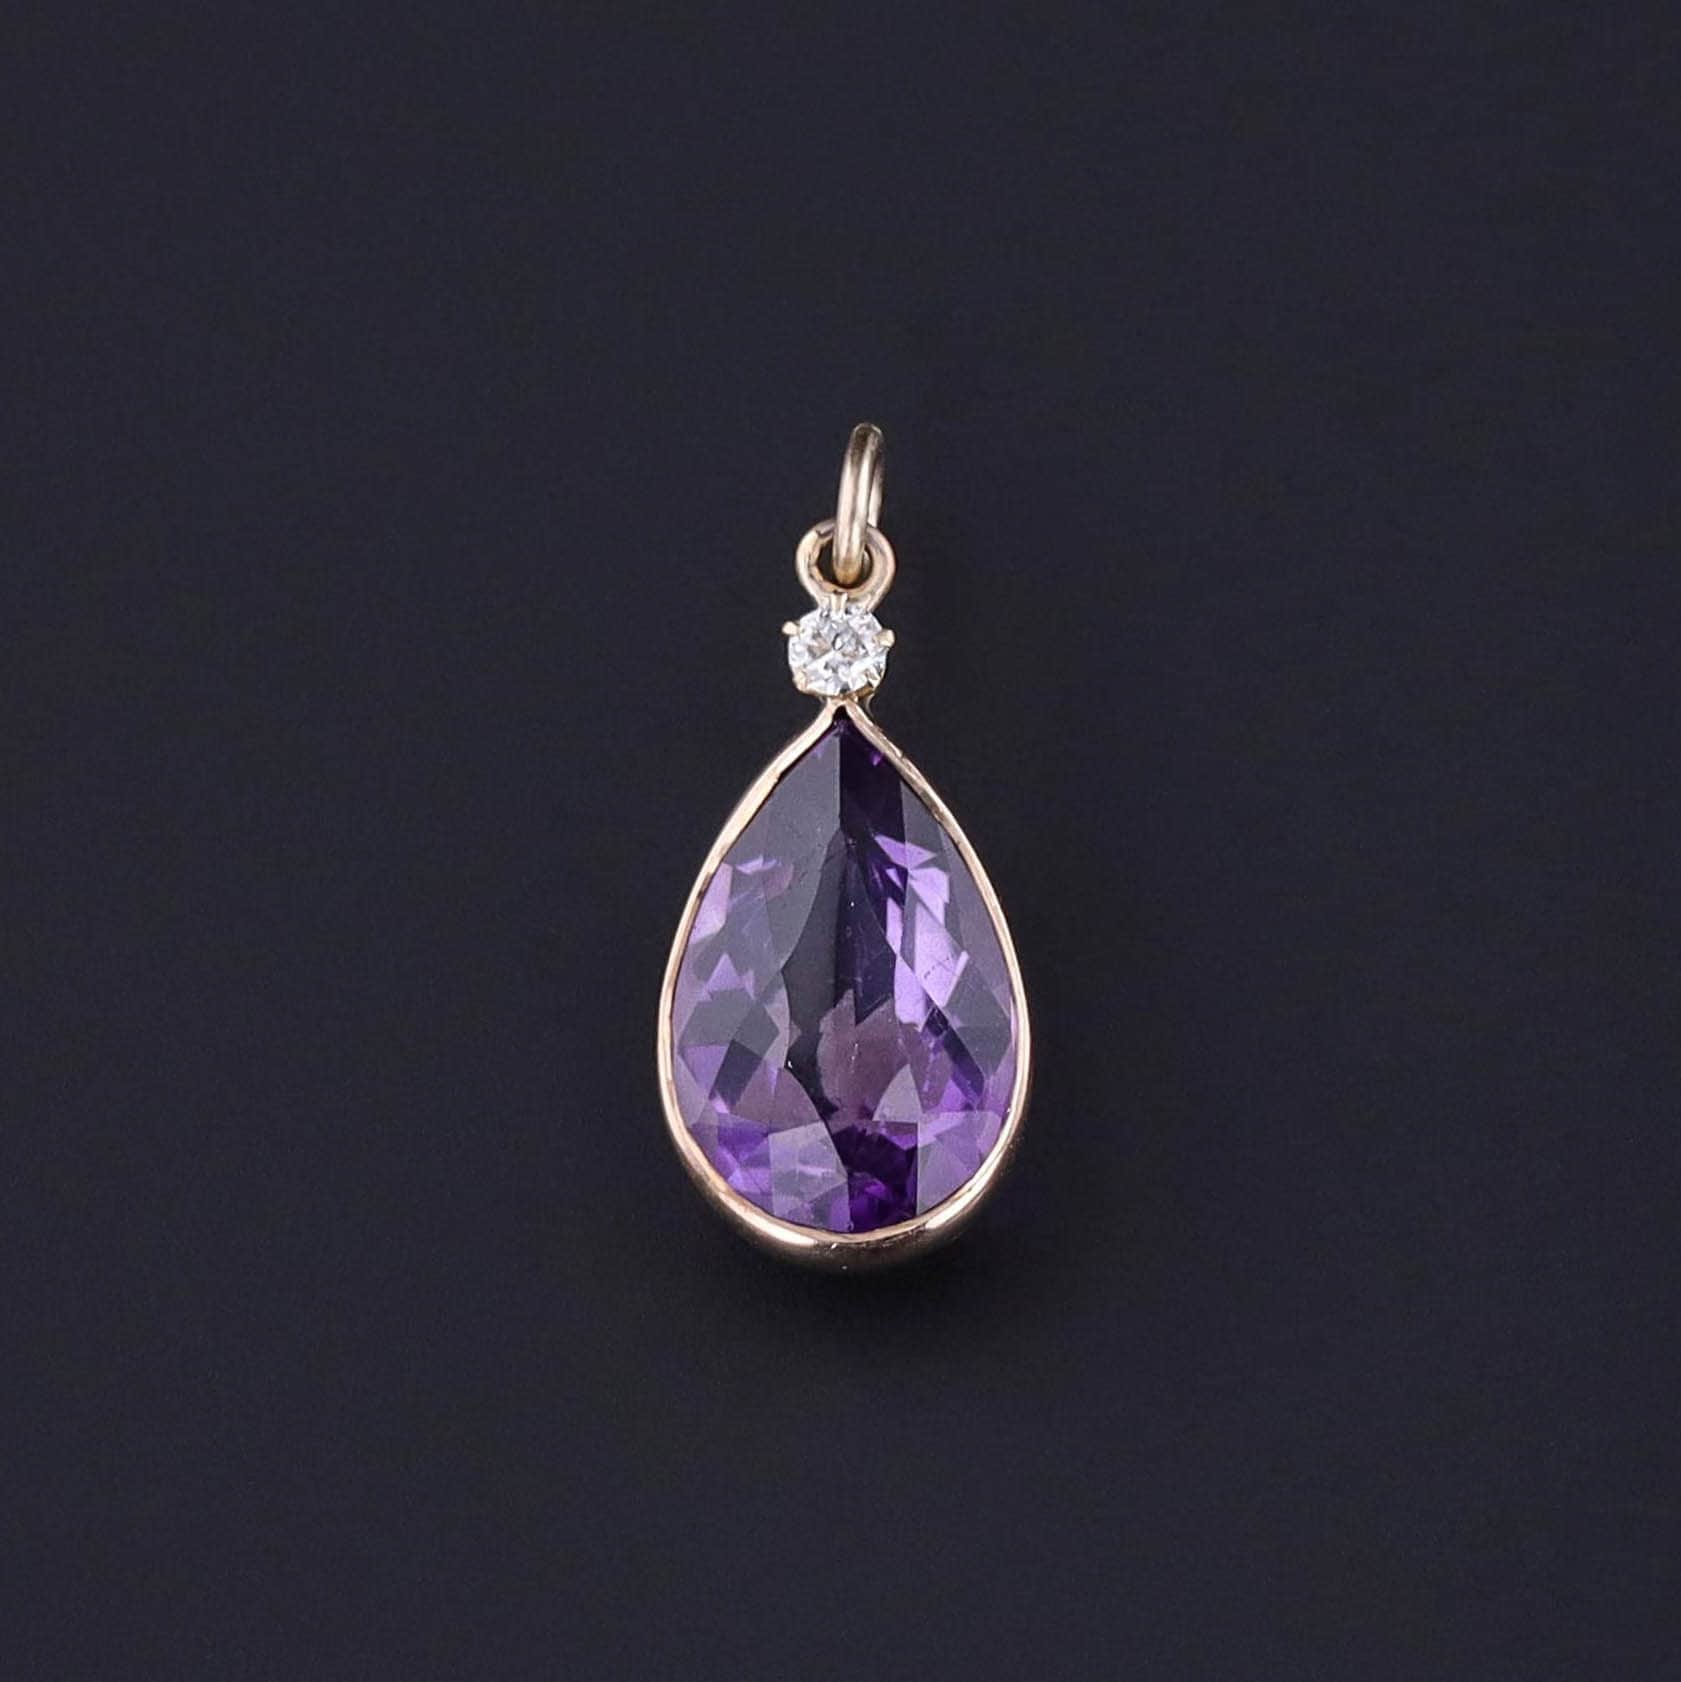 Antique Amethyst Conversion Charm of 14k Gold